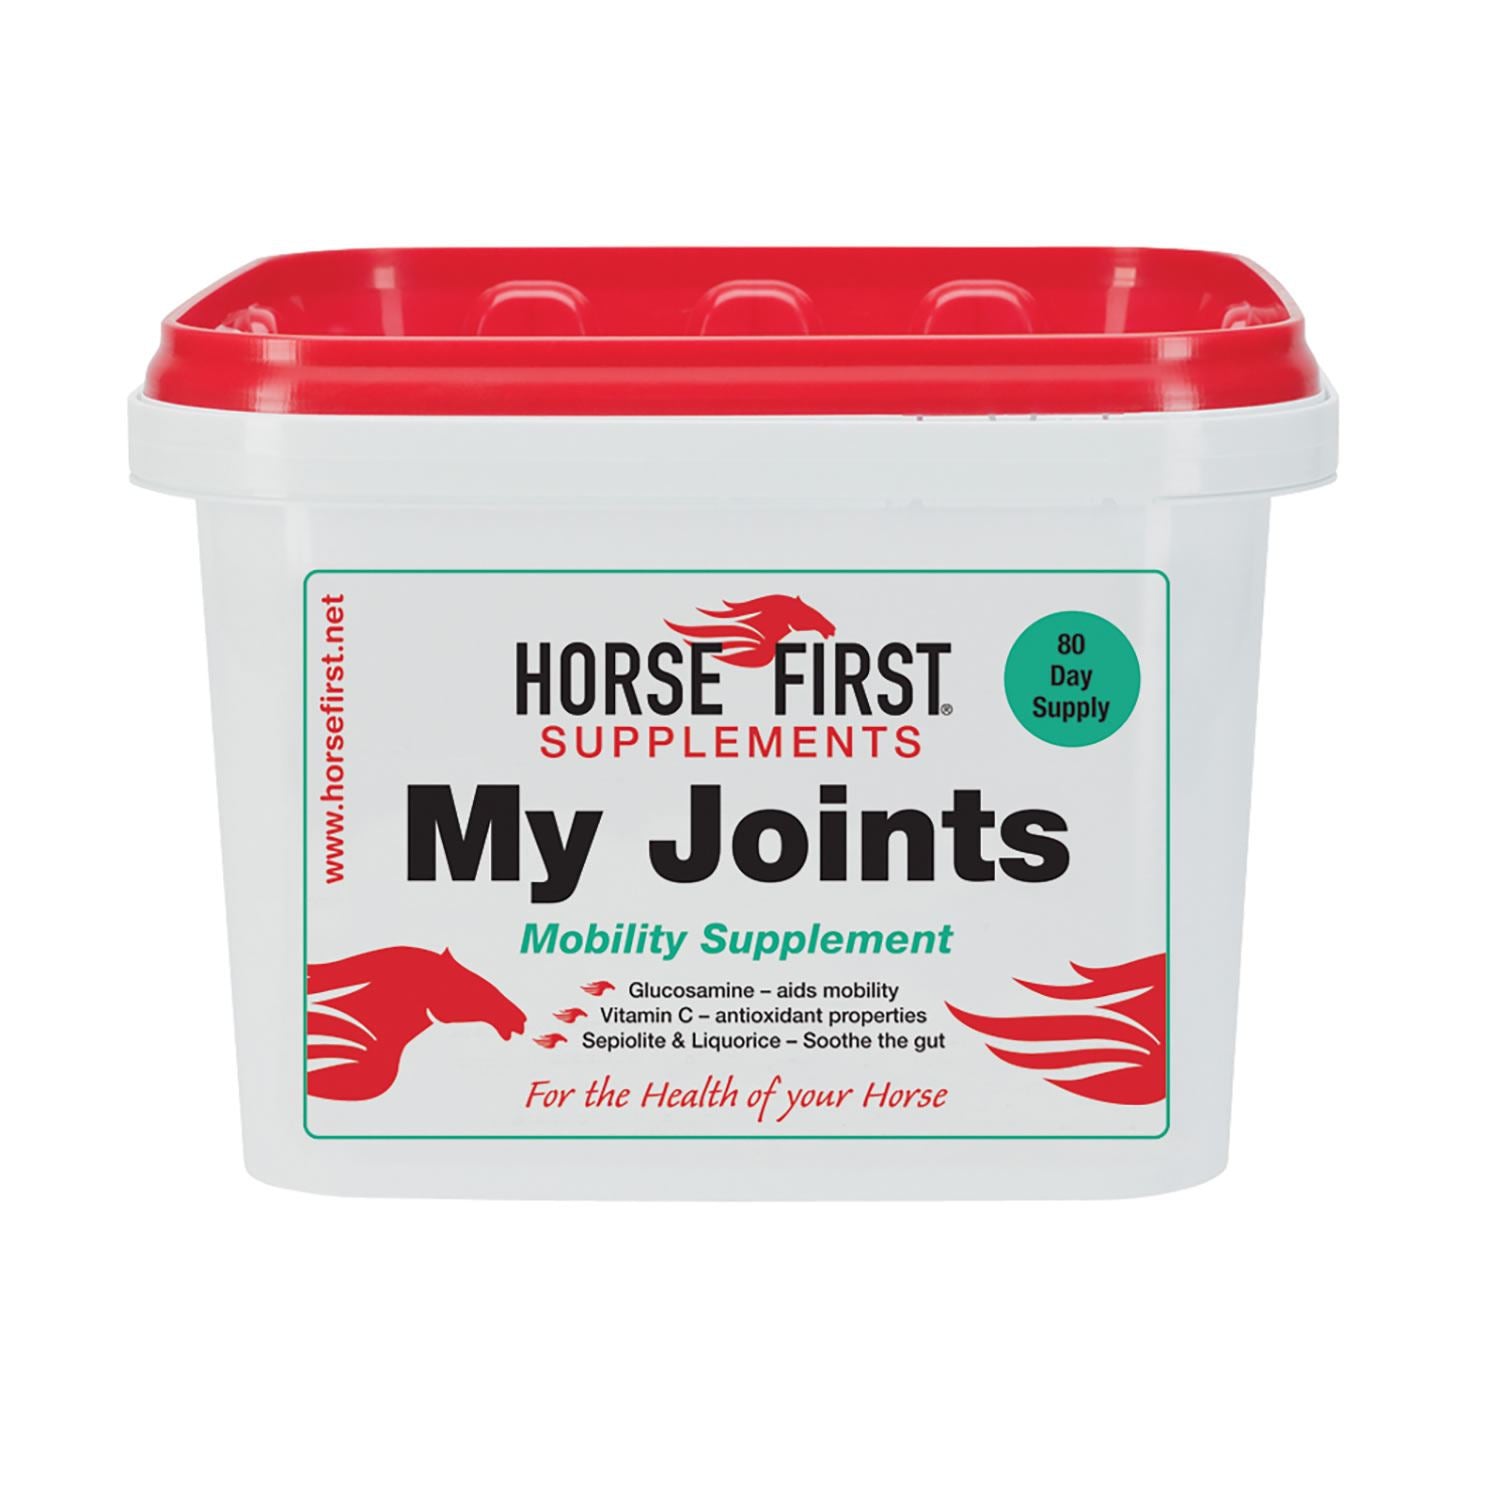 HORSE FIRST MY JOINTS: A premium-quality, high-specification mobility supplement.